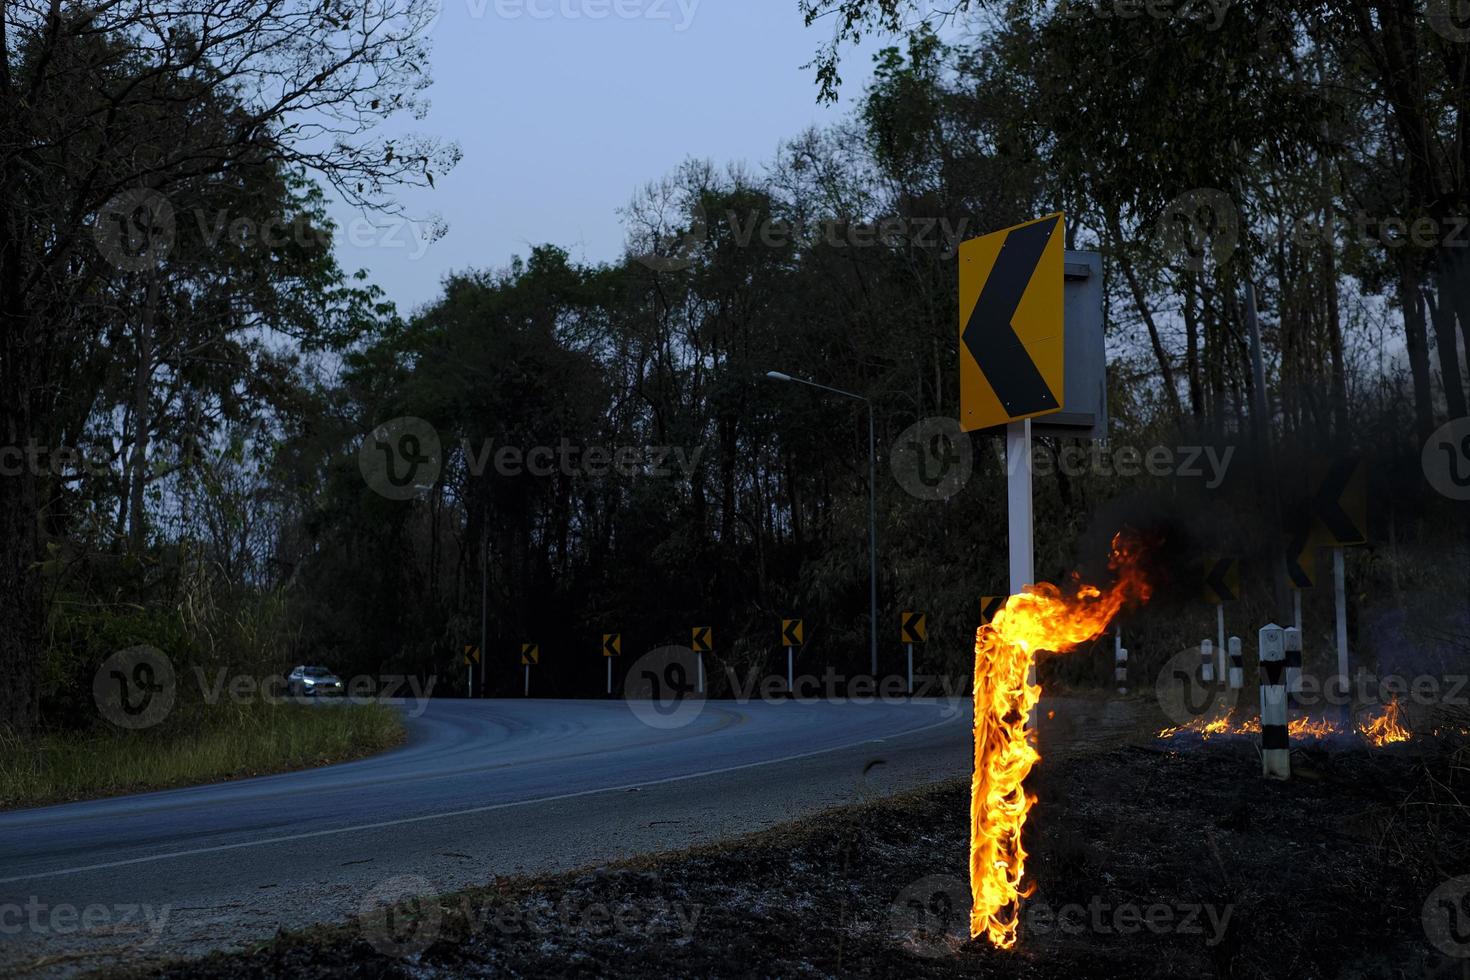 The Roadside Pillar pole is burning with flames and there is smoke rising from the fire caused by wildfire photo